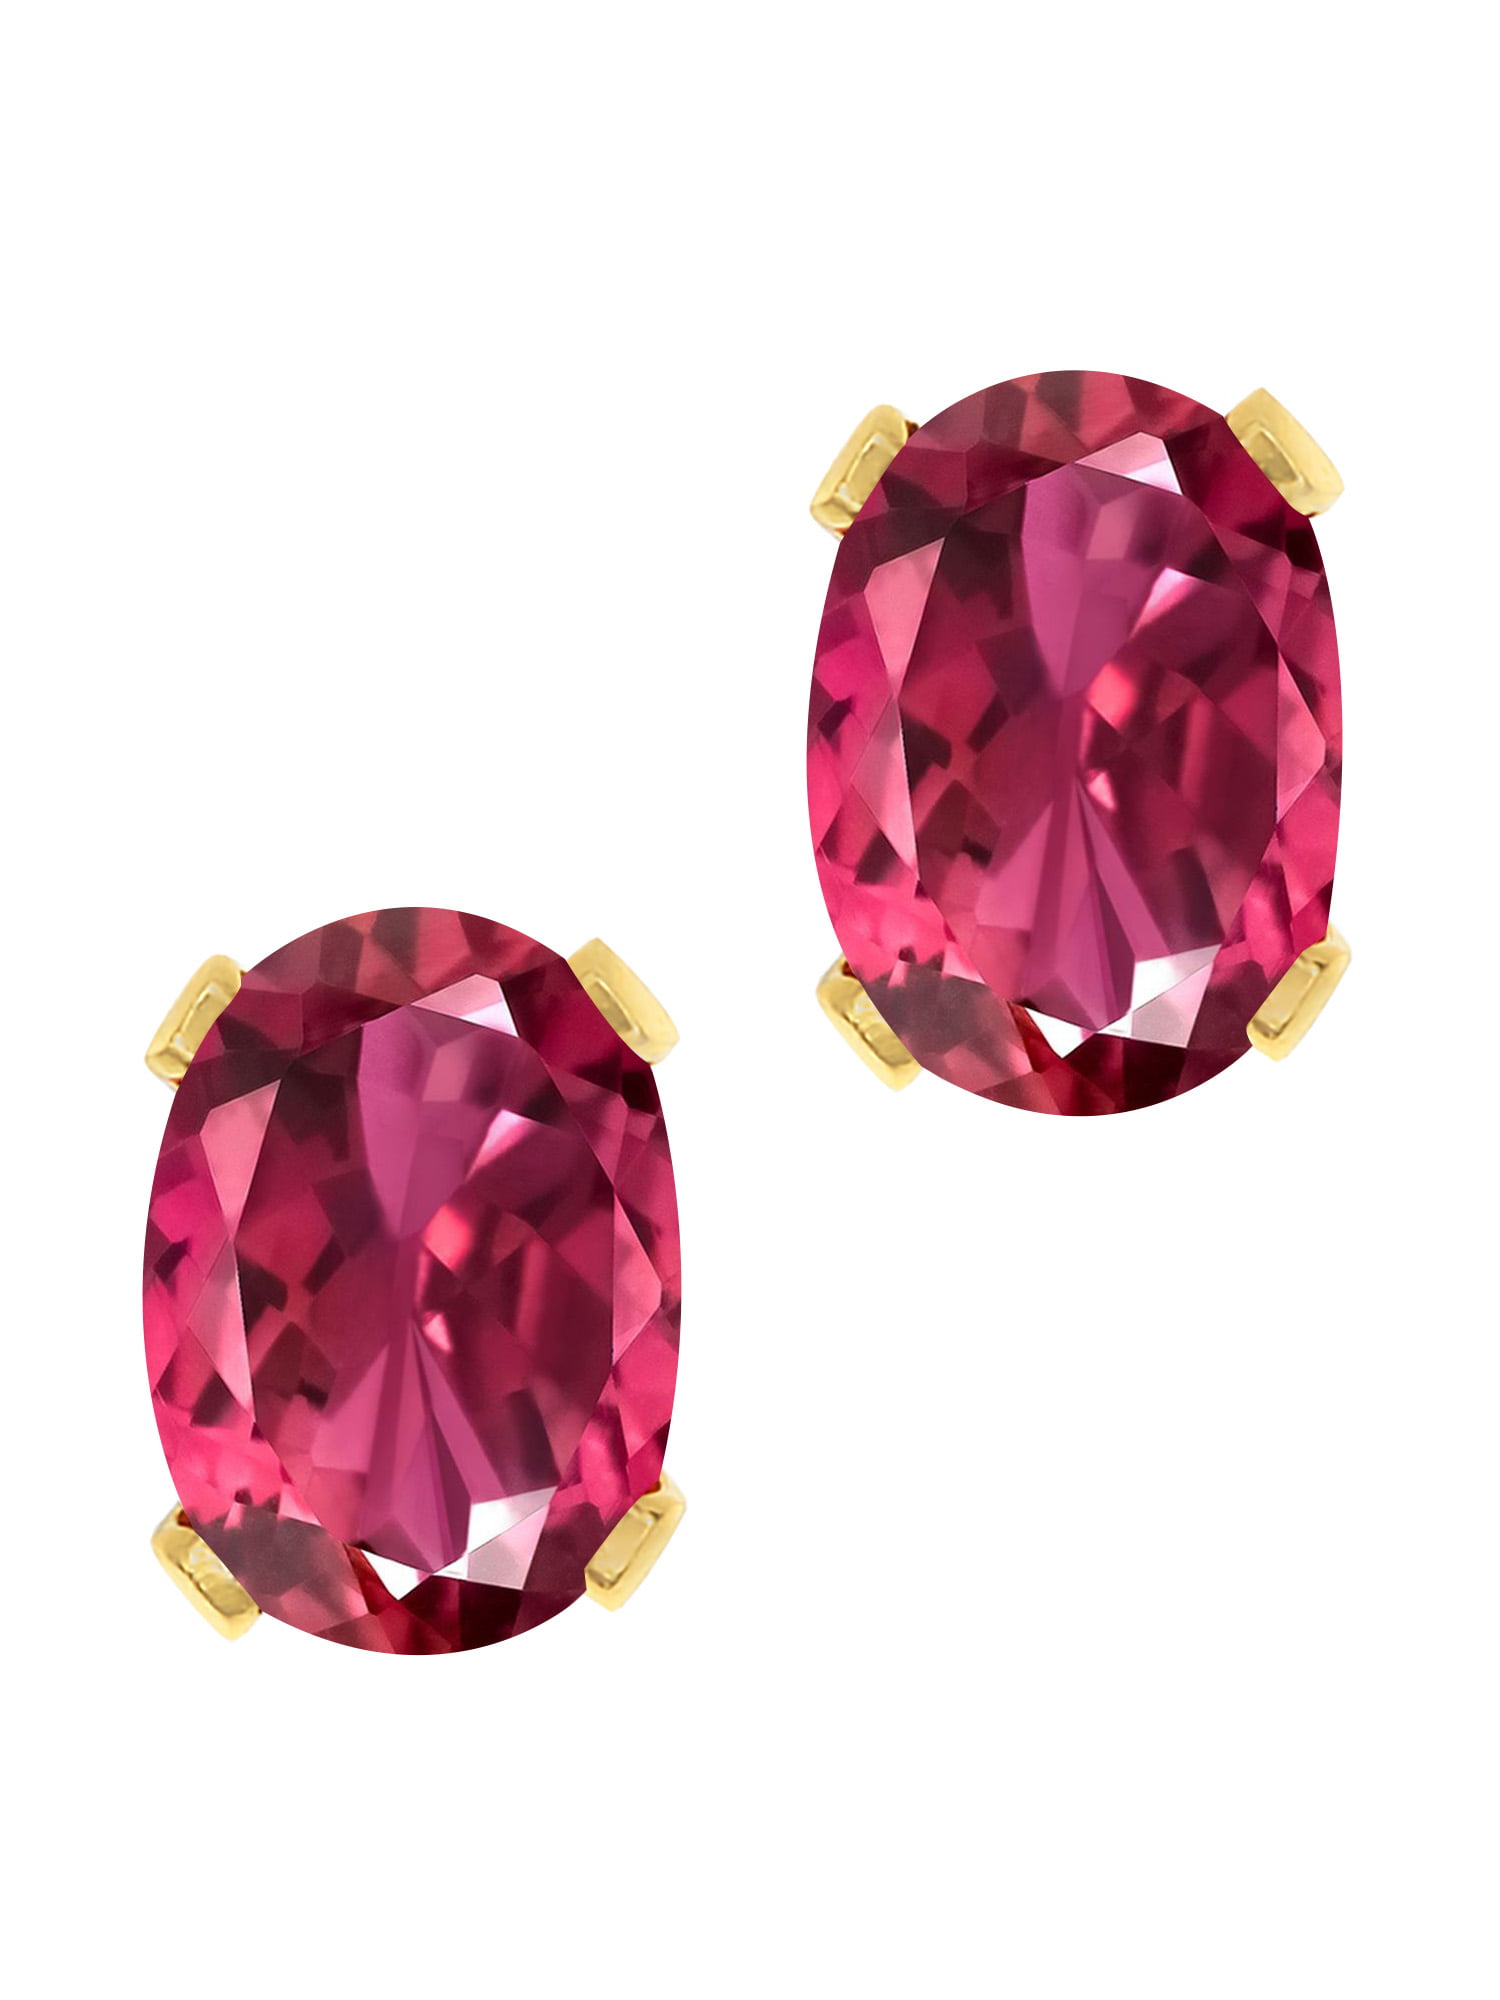 Details about   9K SOLID YELLOW GOLD HEART CUT RUBY STUDS EARRINGS! 